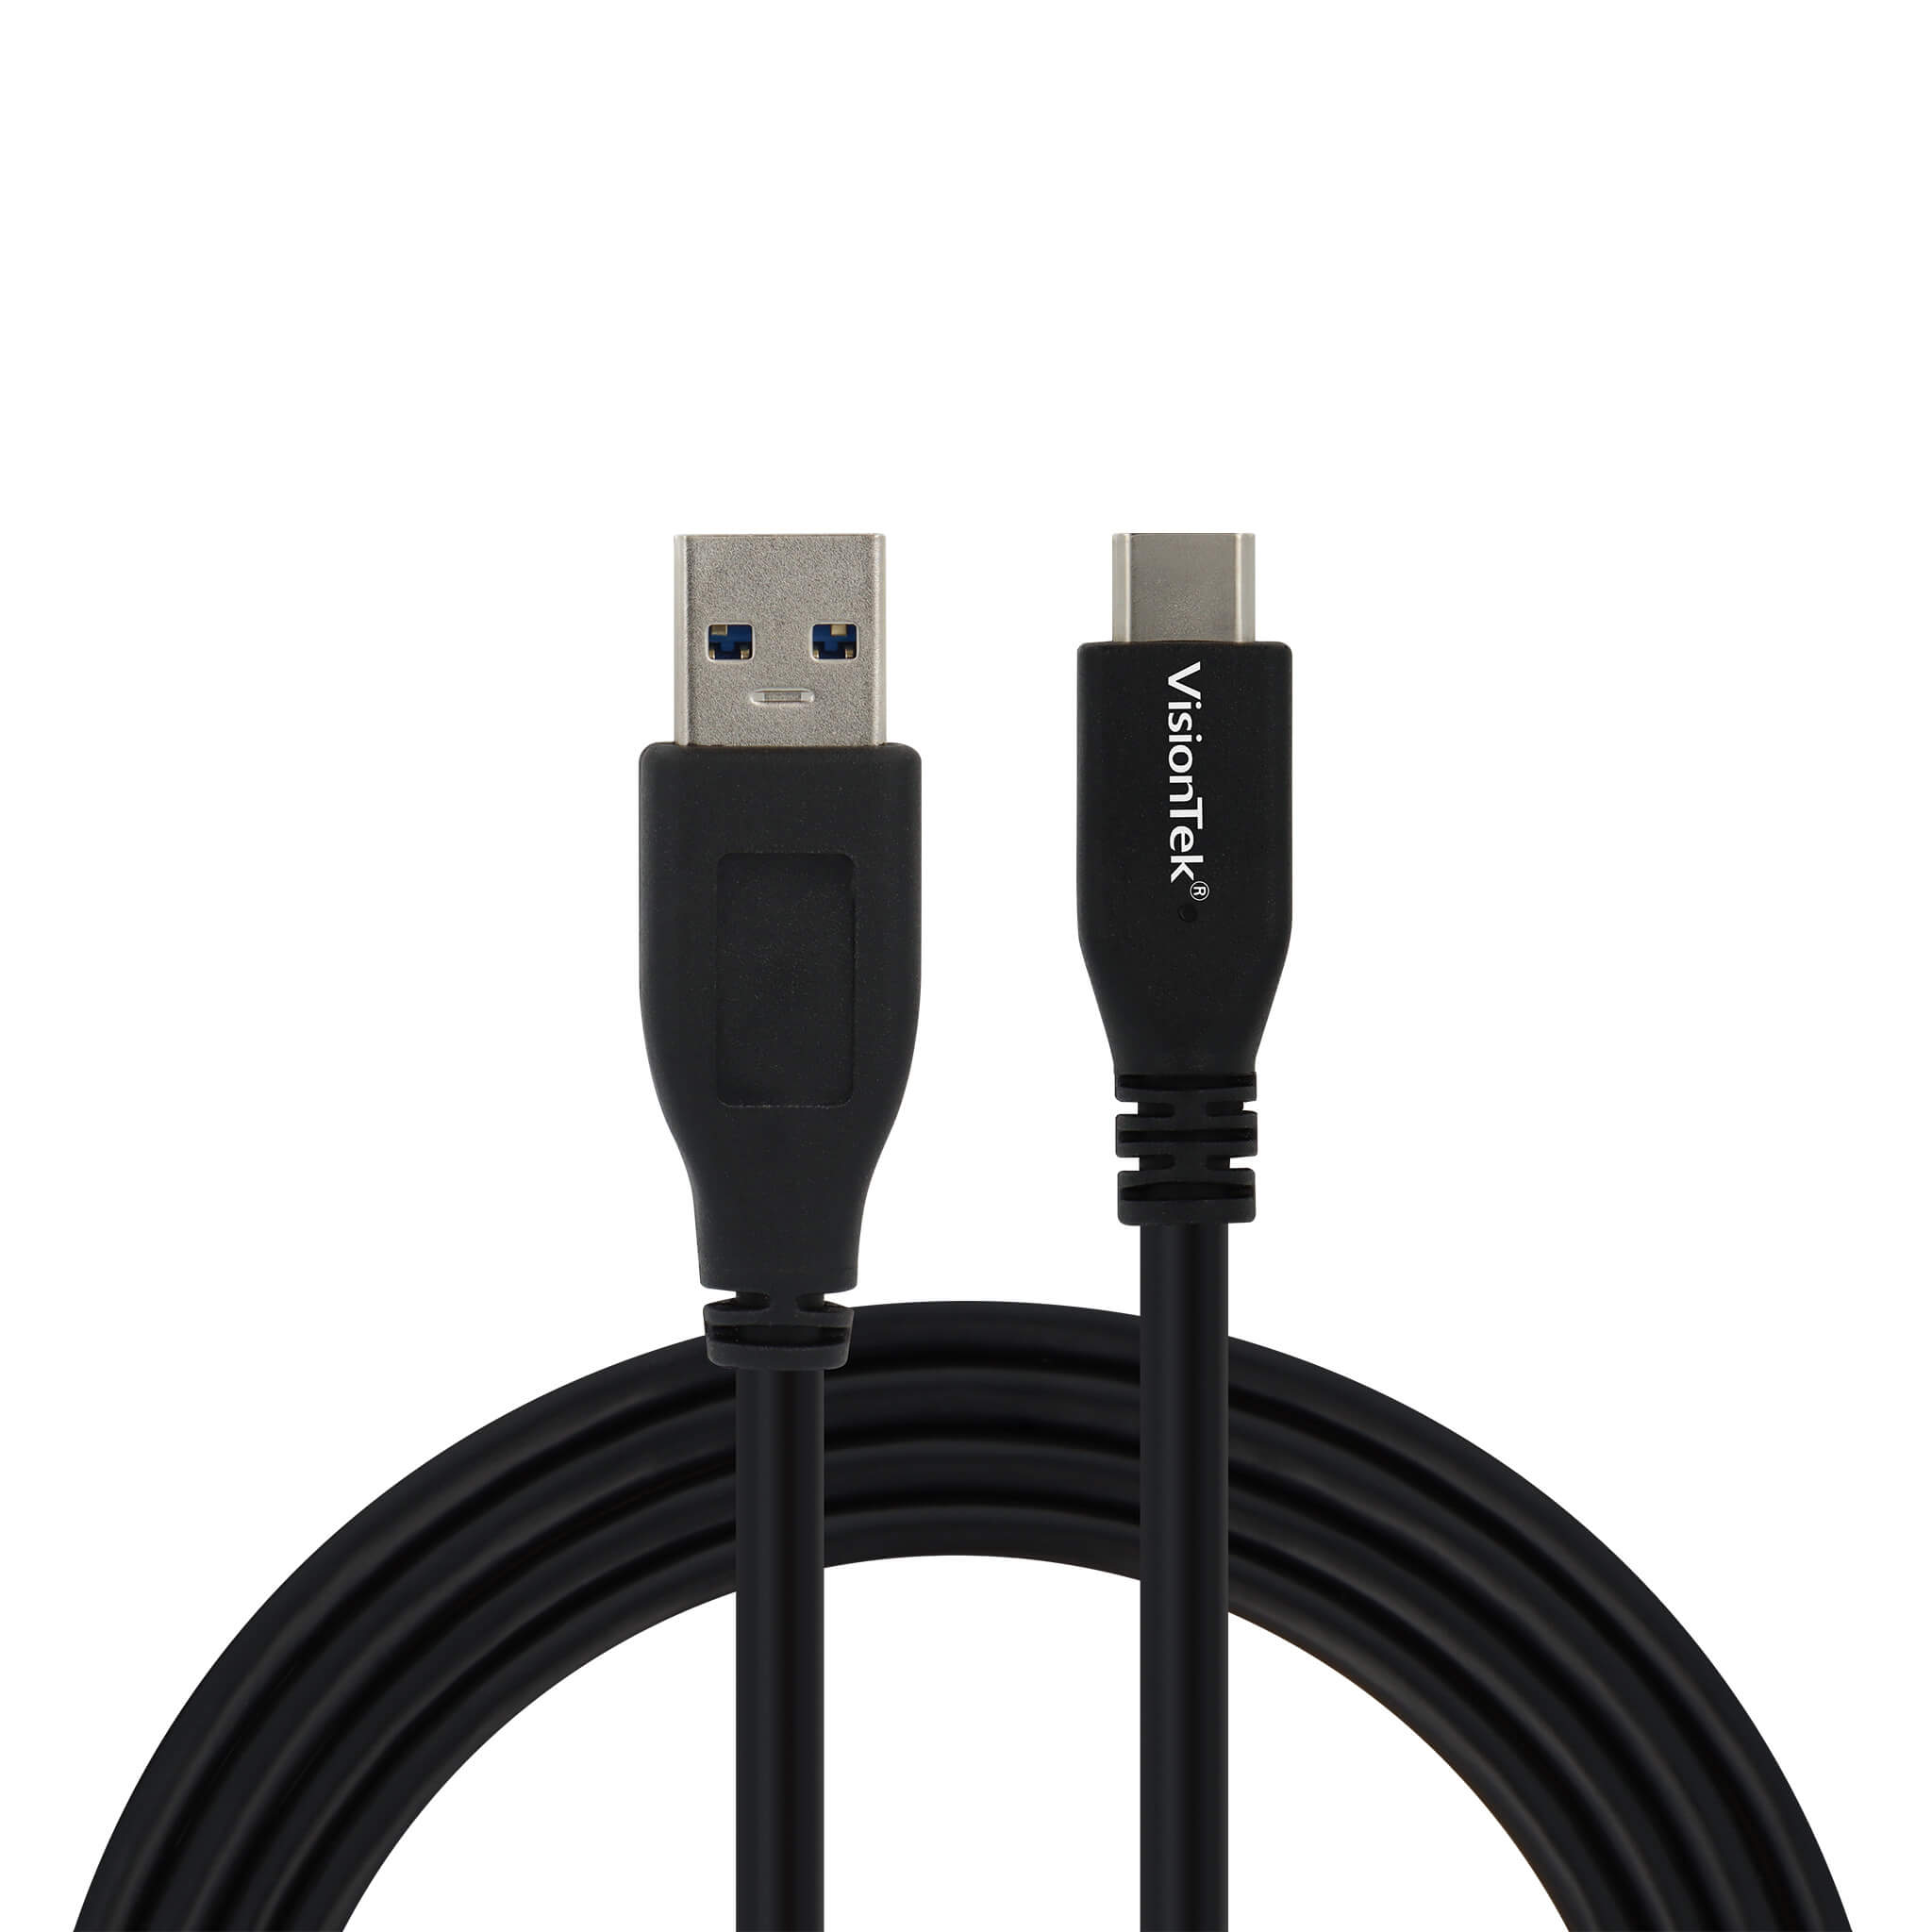 USB-C to USB-A 3.1 Gen 2 Cable 1 Meter (M/M)